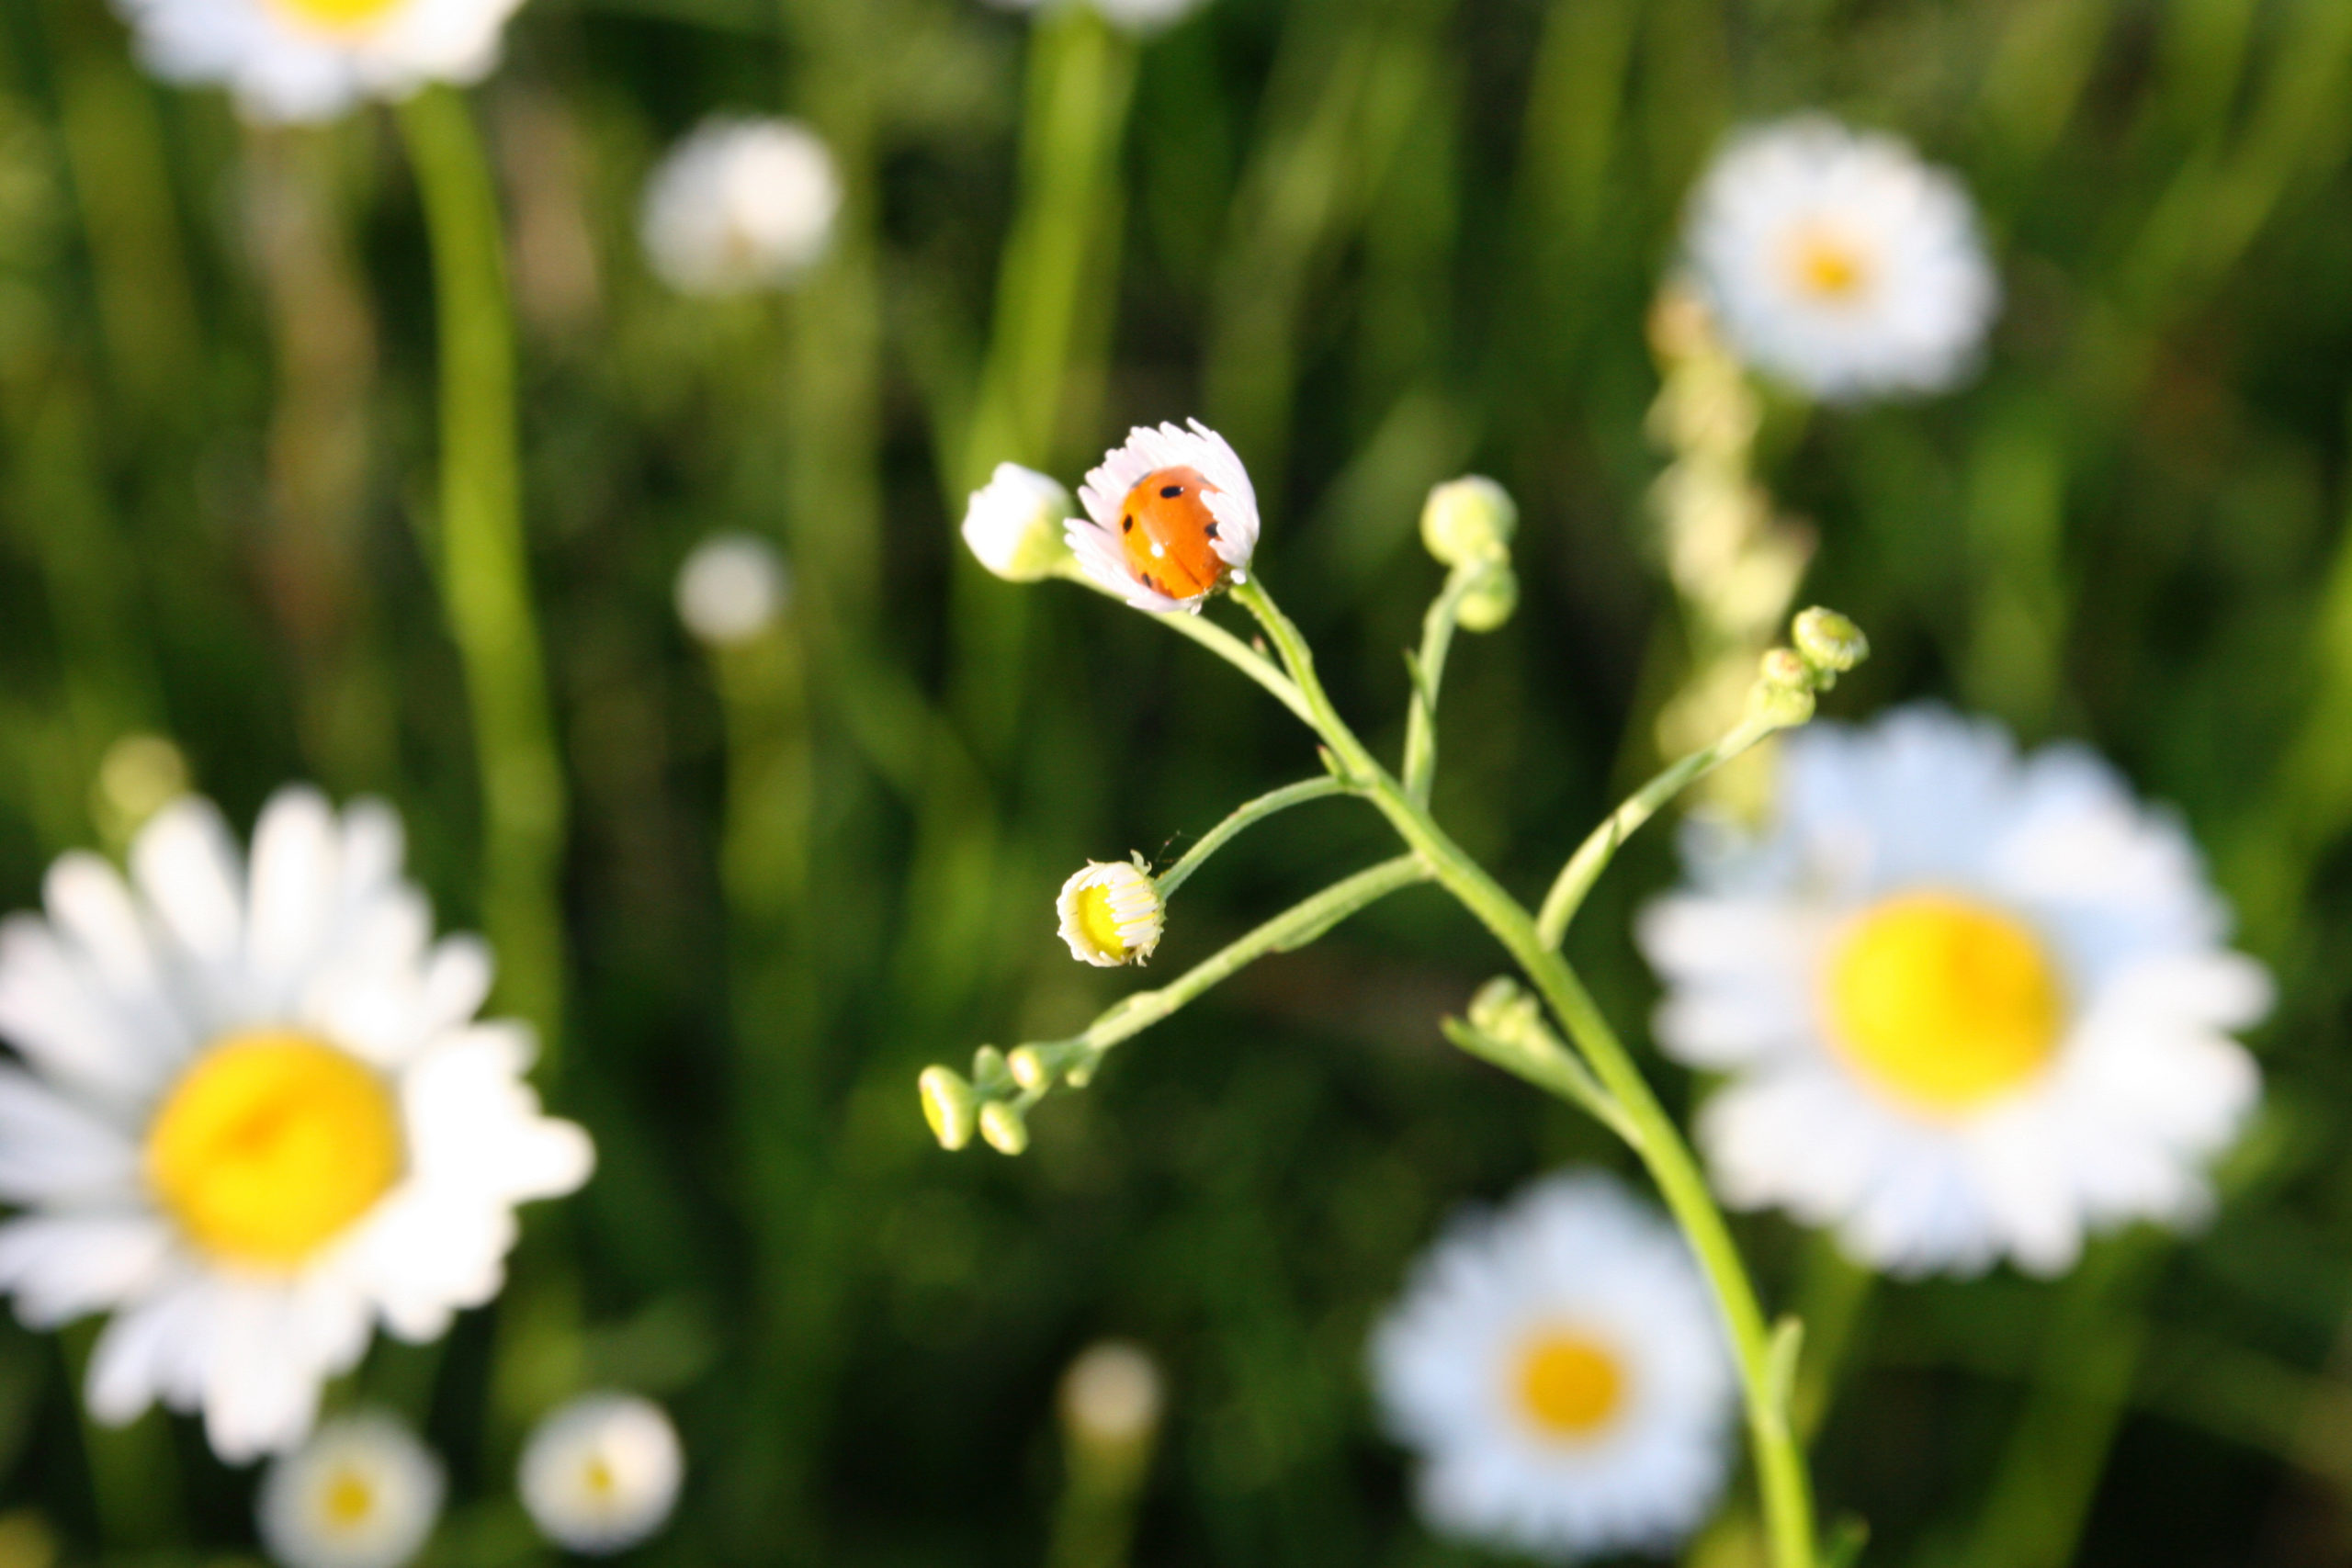 Ladybugs never go out of style, especially all cozied up in a daisy in a field across the street.